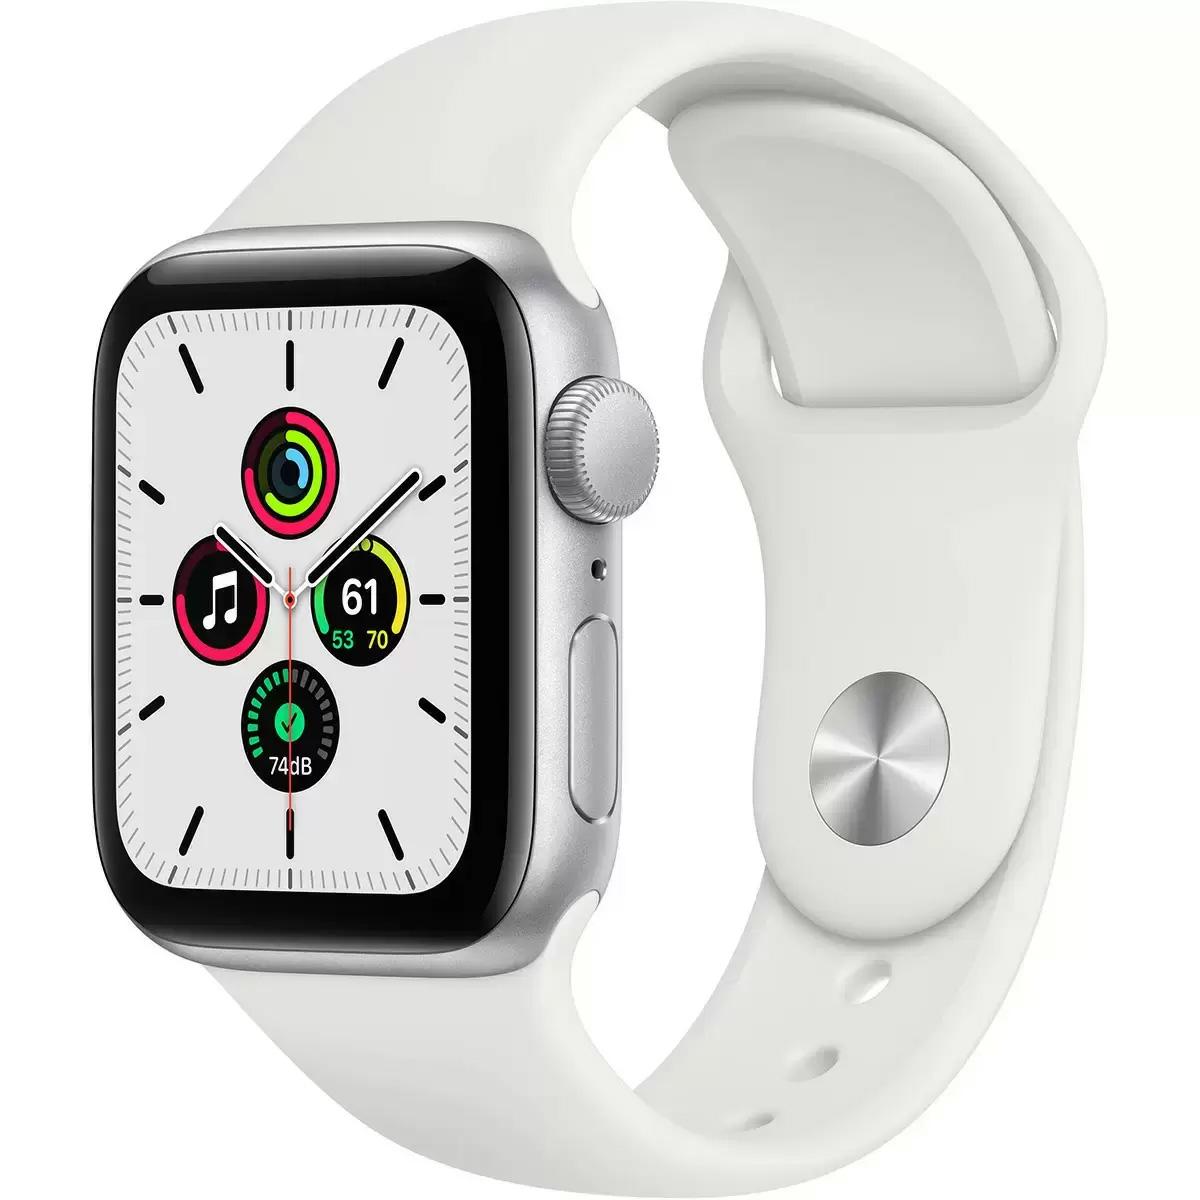 Apple Watch SE Aluminum Case Smartwatch for $229.99 Shipped